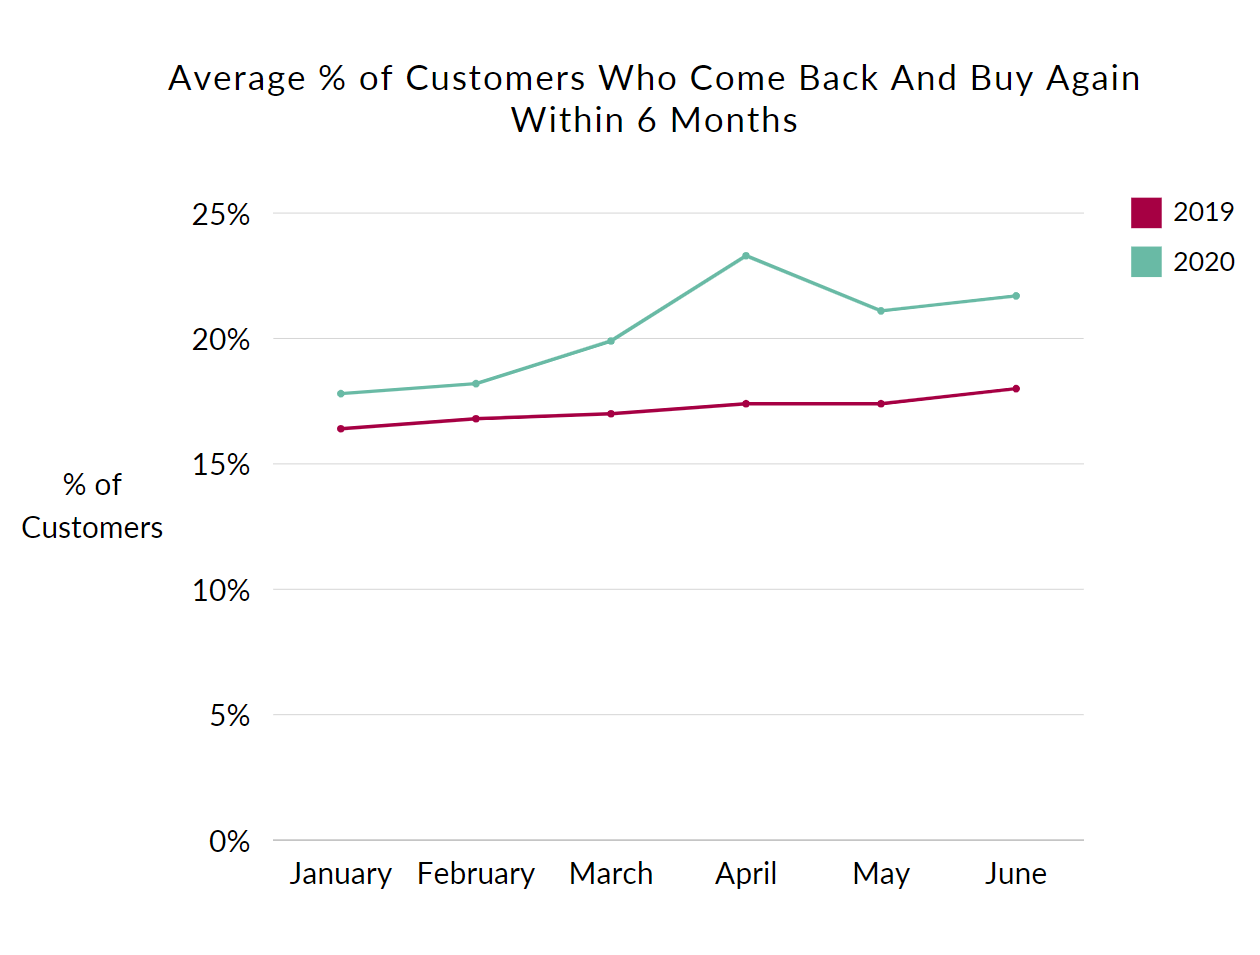 Graph showign average percentage of customers who came back and bought again within 6 months between January and June, 2019 versus 2020